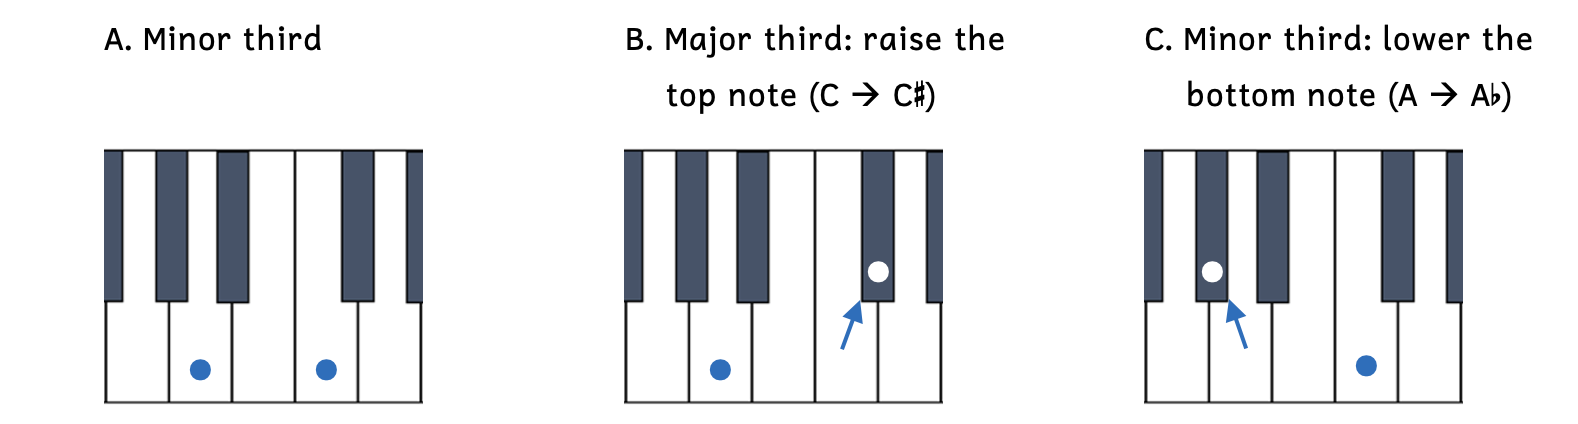 Example A shows A and C singled out on a keyboard. Example B raises C to C-sharp to create a major third. Example C lowers A to A-flat to create a major third.